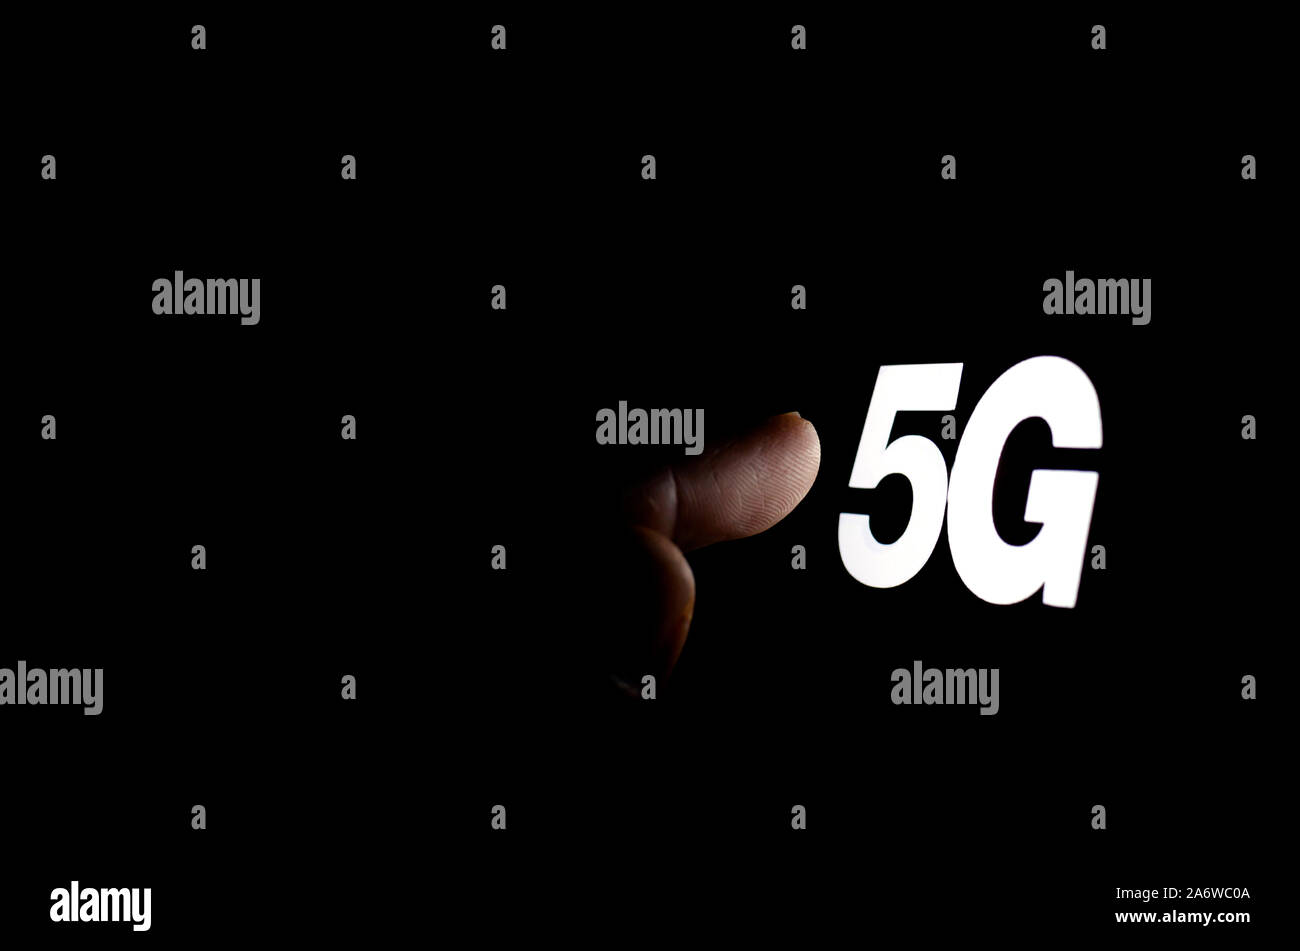 5G letters glowing on the smartphone screen and the hand reaching for it. The concept photo for 5G wireless network. Stock Photo